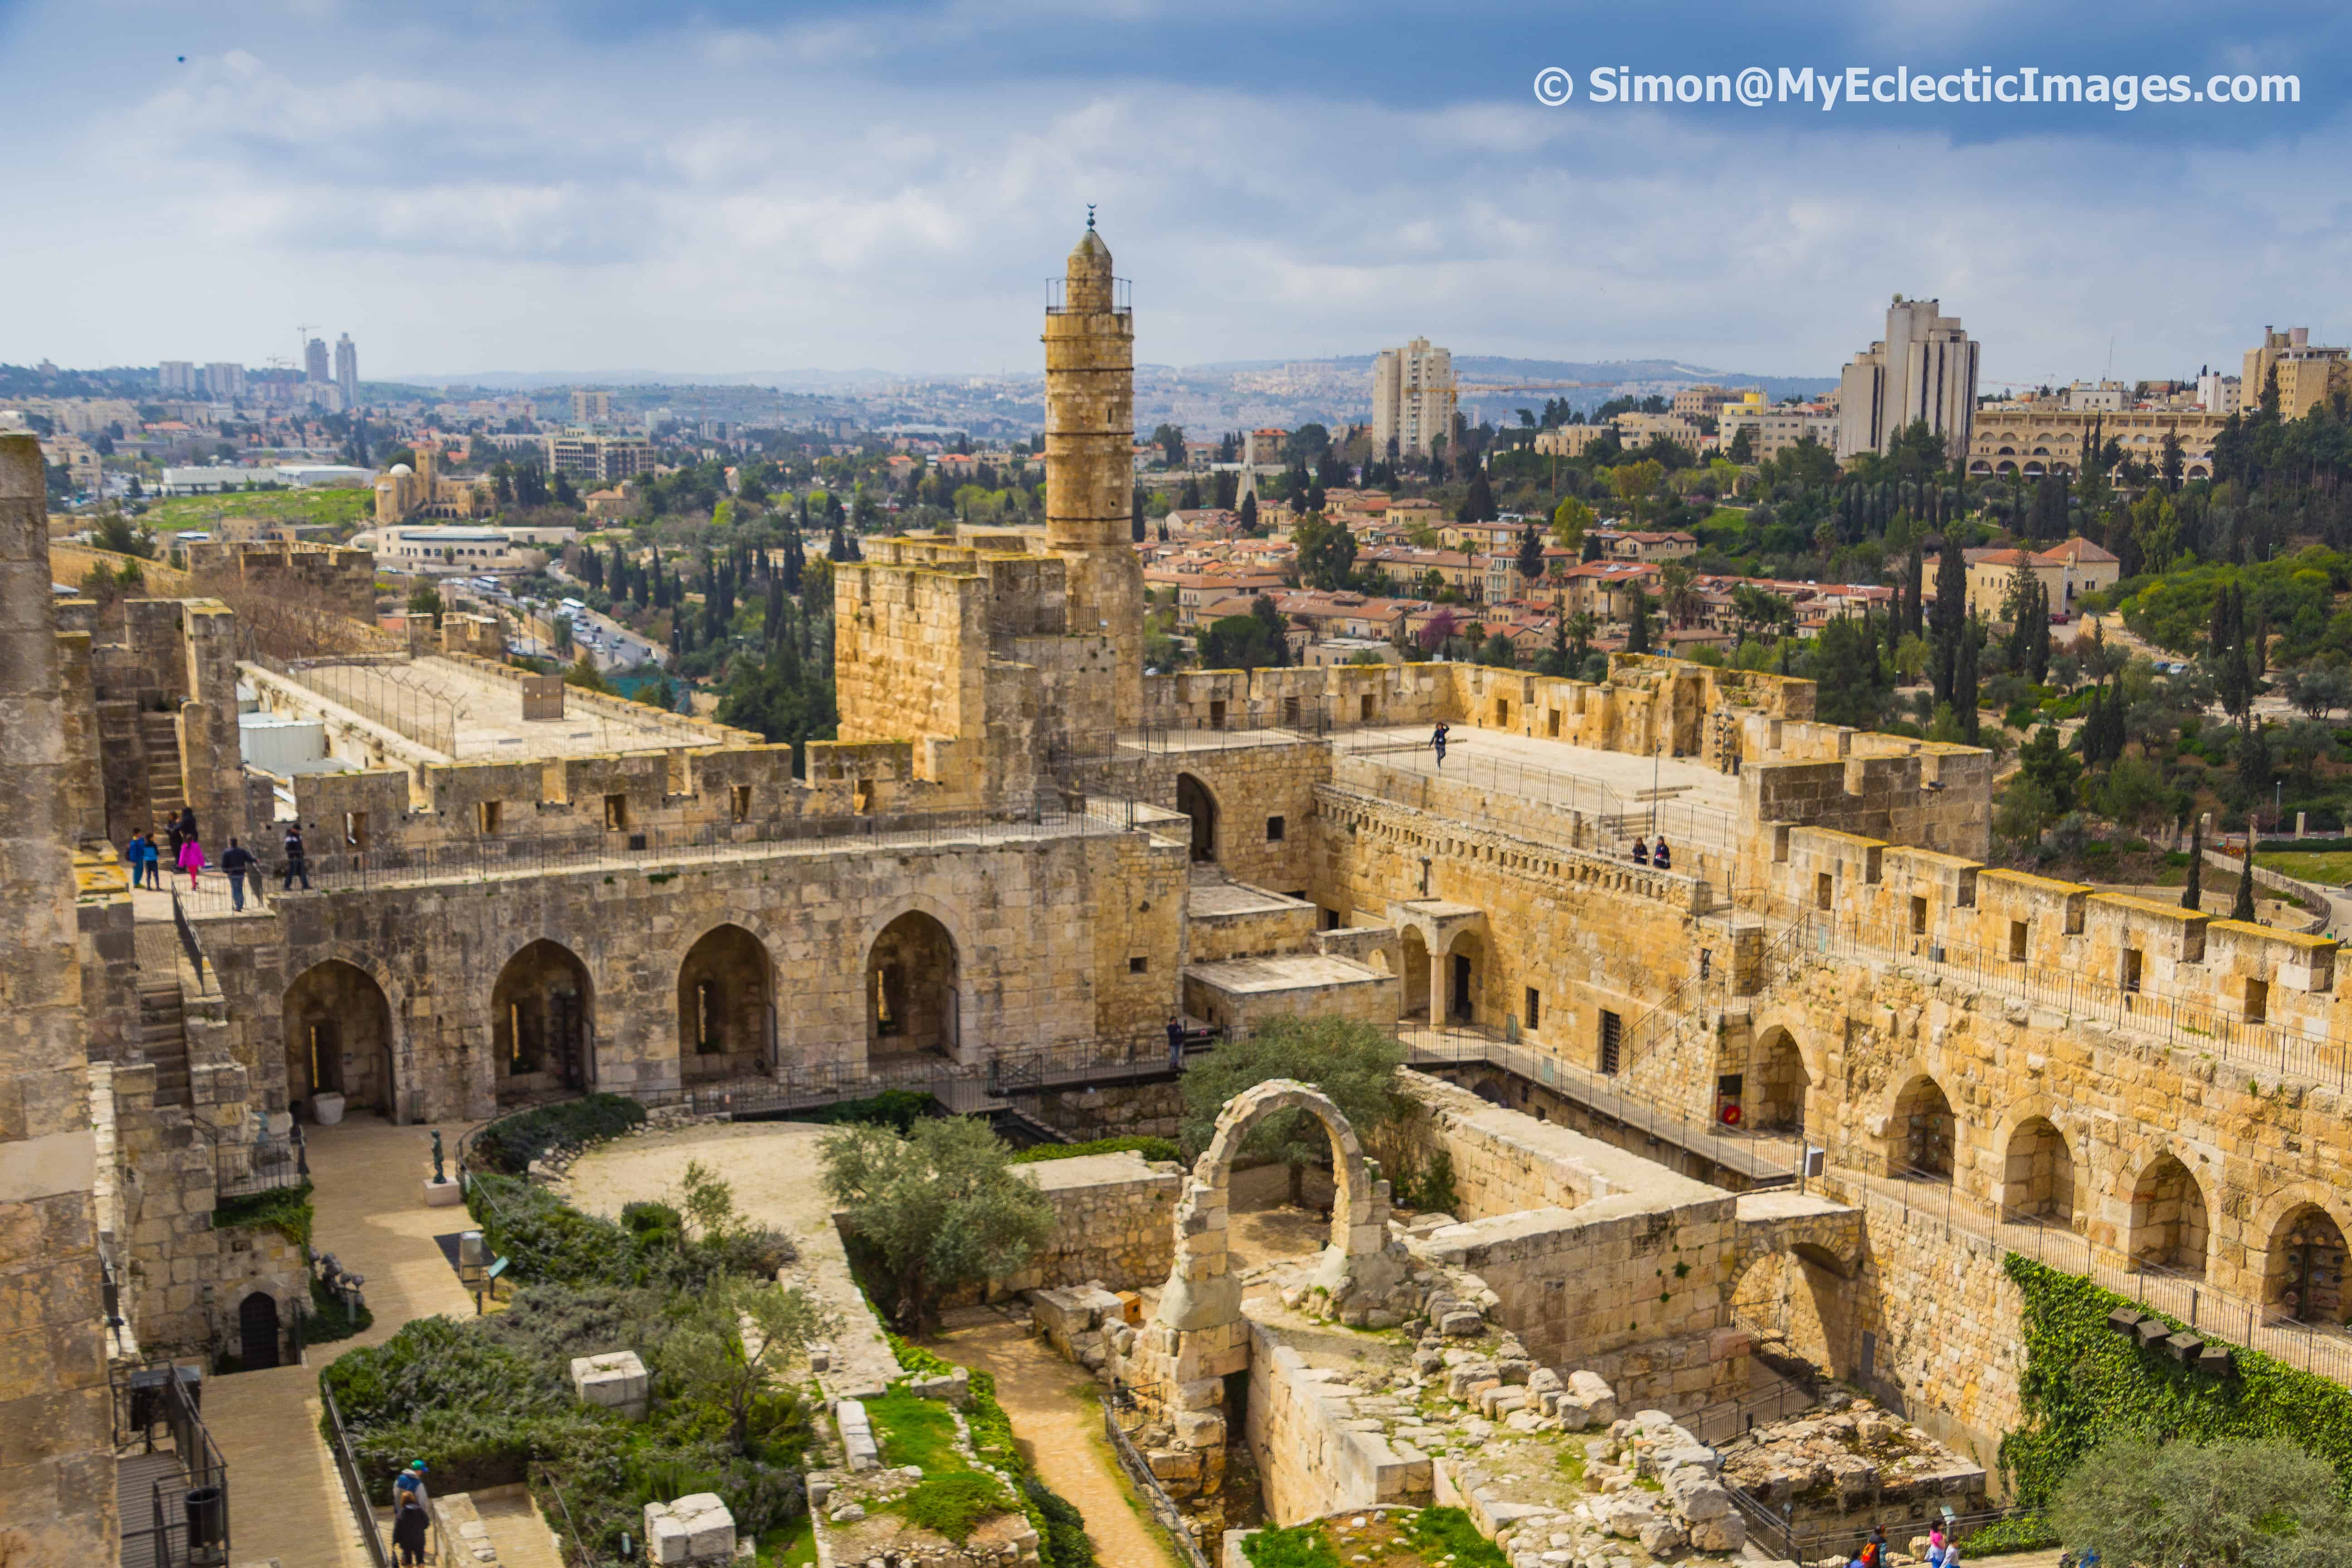 A view of the Citadel and the city beyond from the Tower of David Jerusalem